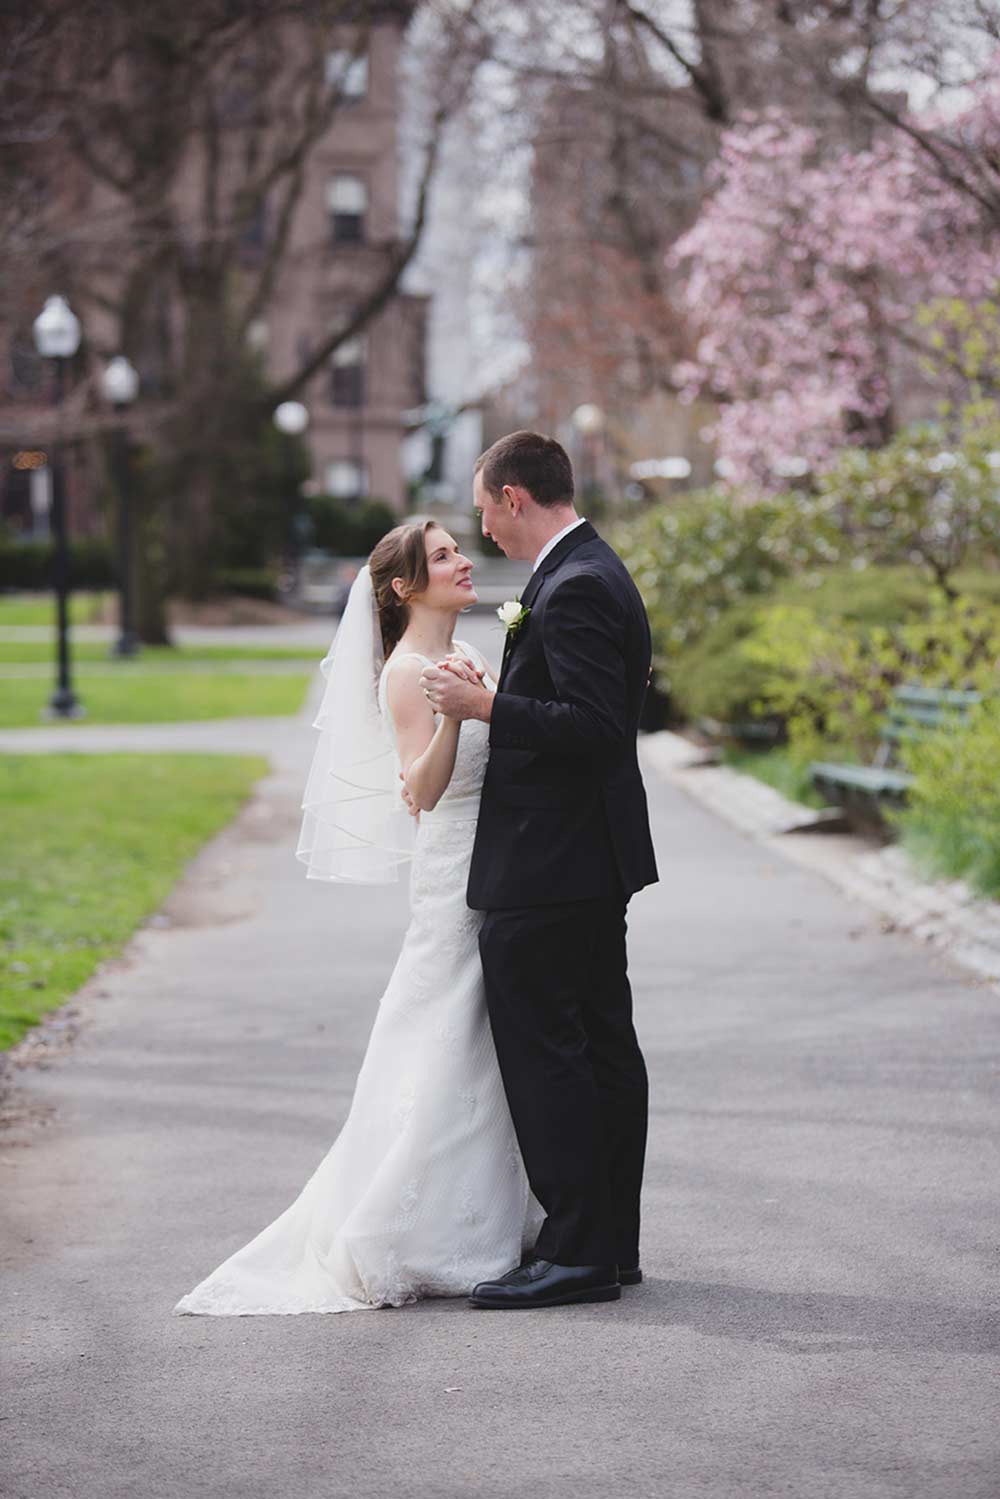 A natural portrait of a couple dancing together during their wedding portraits in Boston Public Gardens